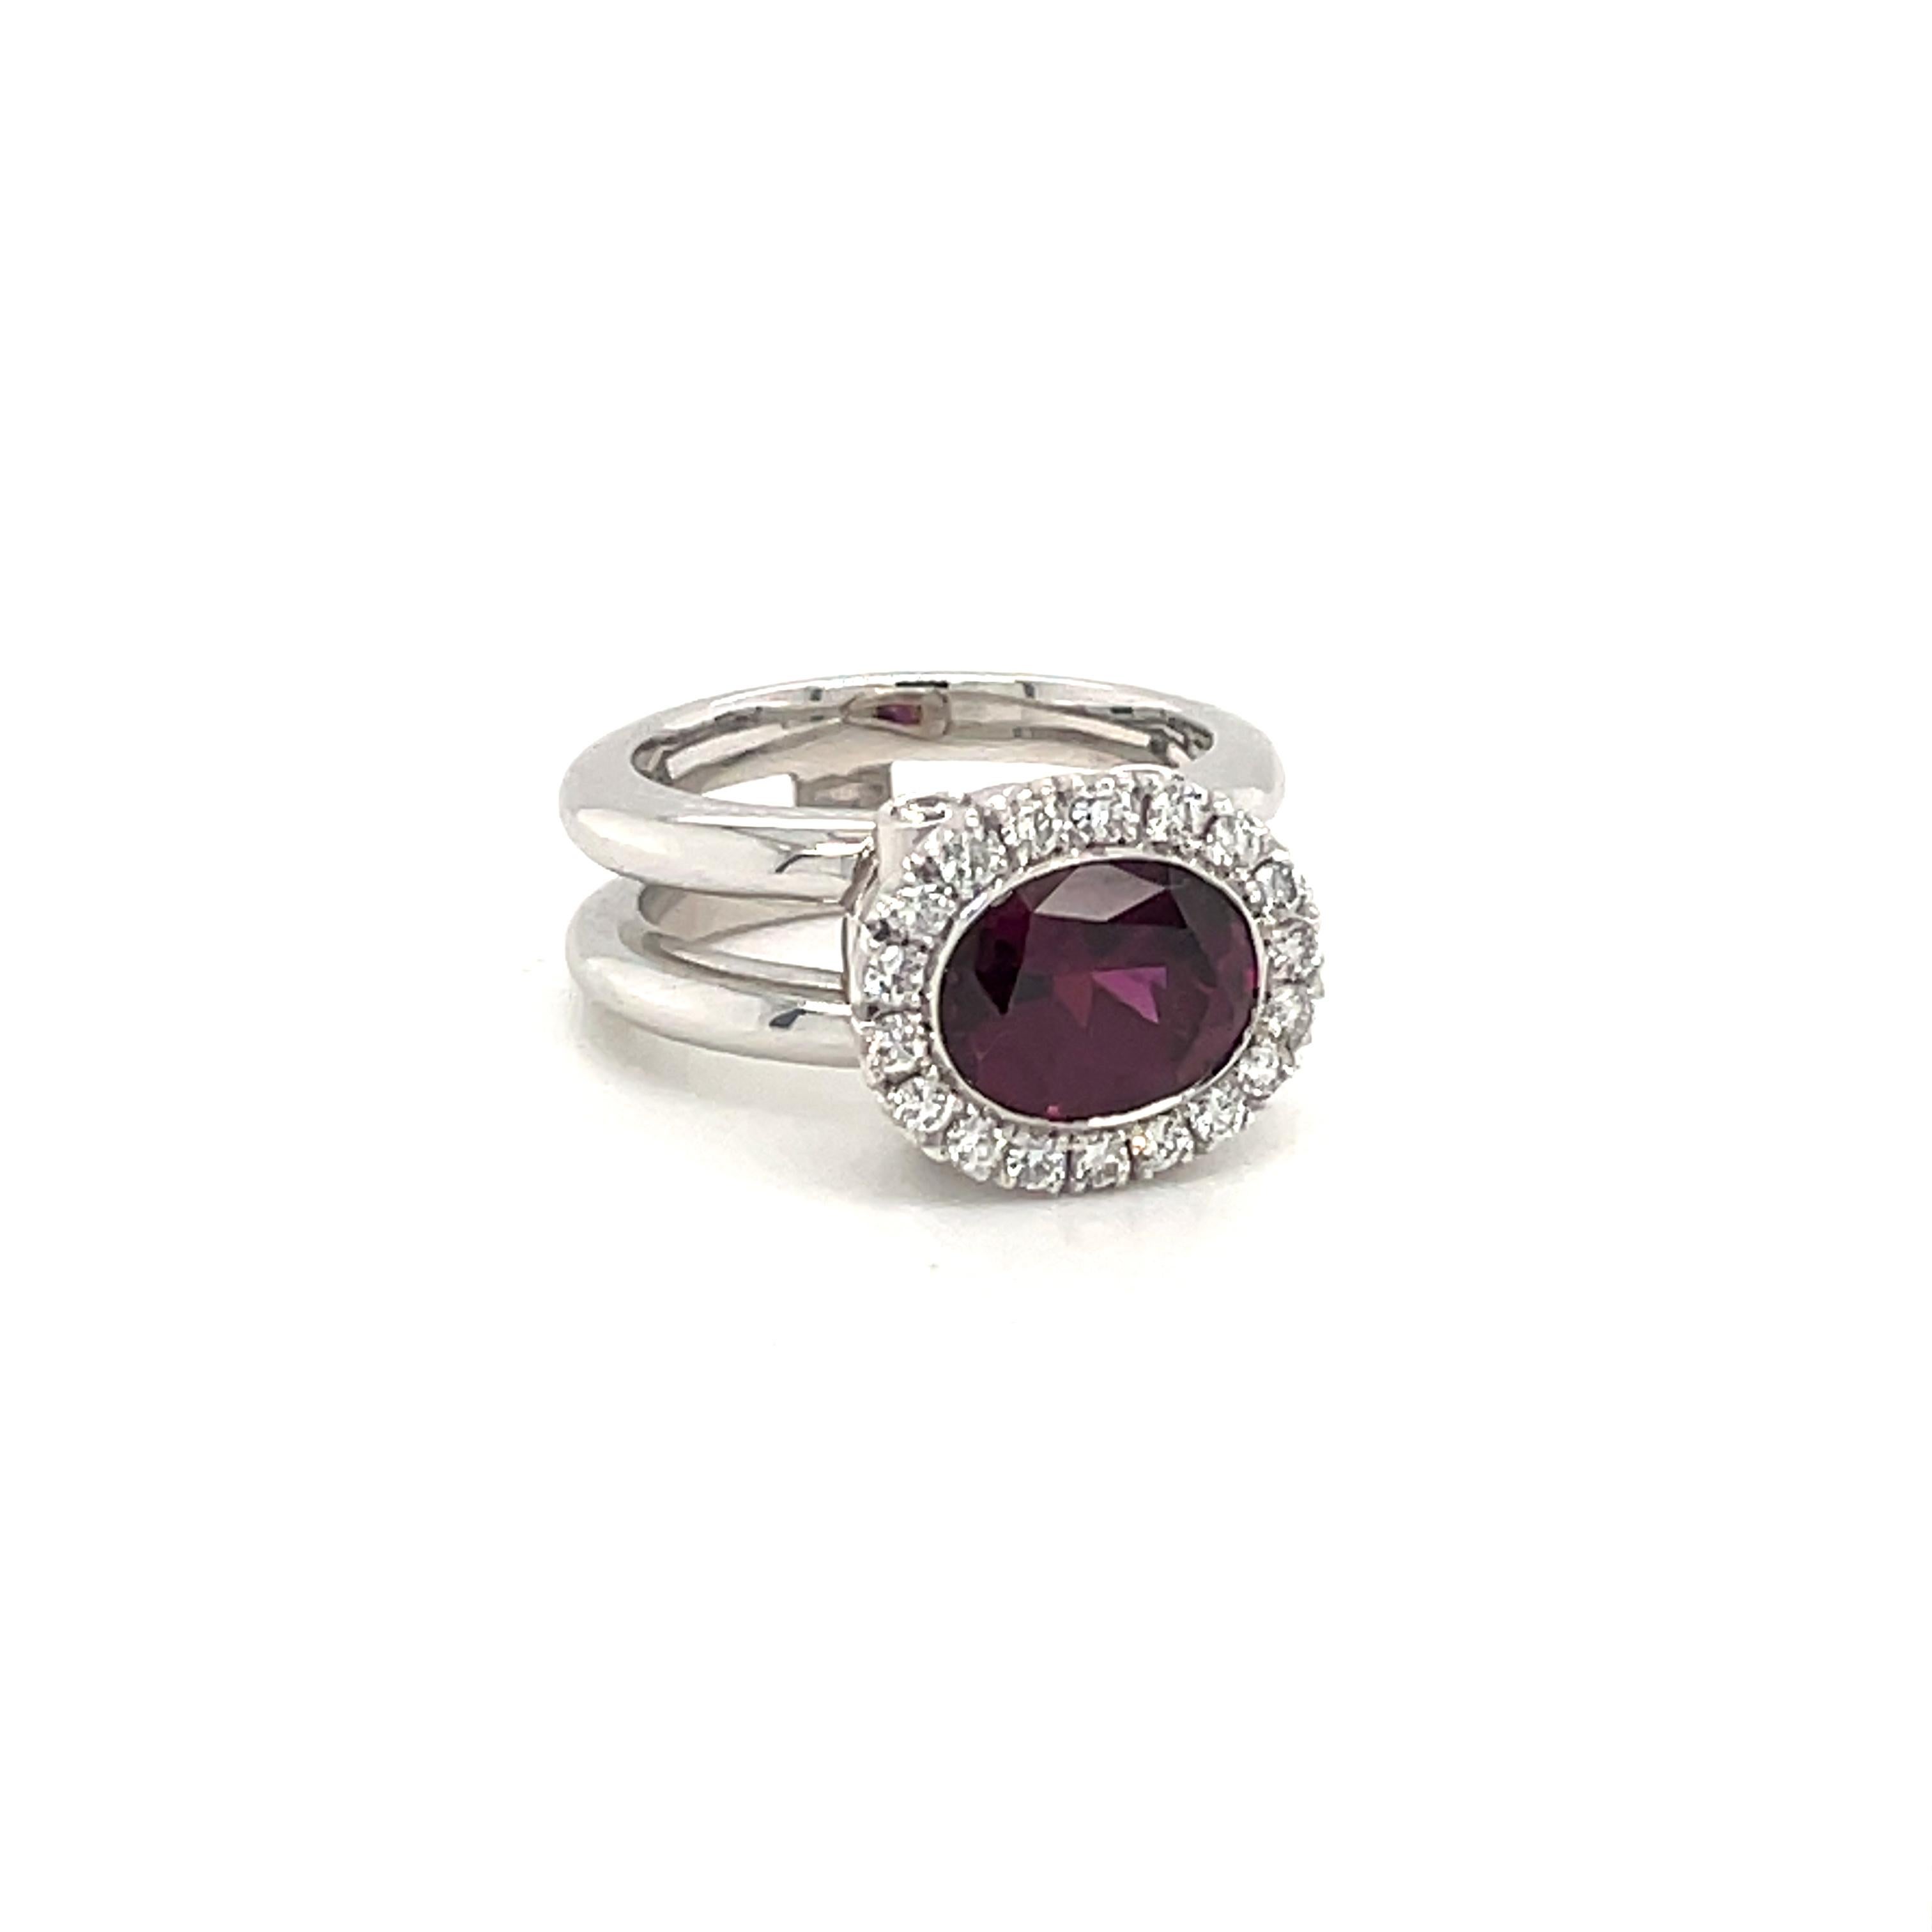 18 Karat White gold Cocktail Ring featuring a 3.26 Carat Purple Garnet stone.

Round cut measuring 10.2 x 7.8mm.
The Purple Garnet Ring is set with Collection Grade Diamonds weighing 0.39 ct.

The double buggy is one of Jochen Leen's very first